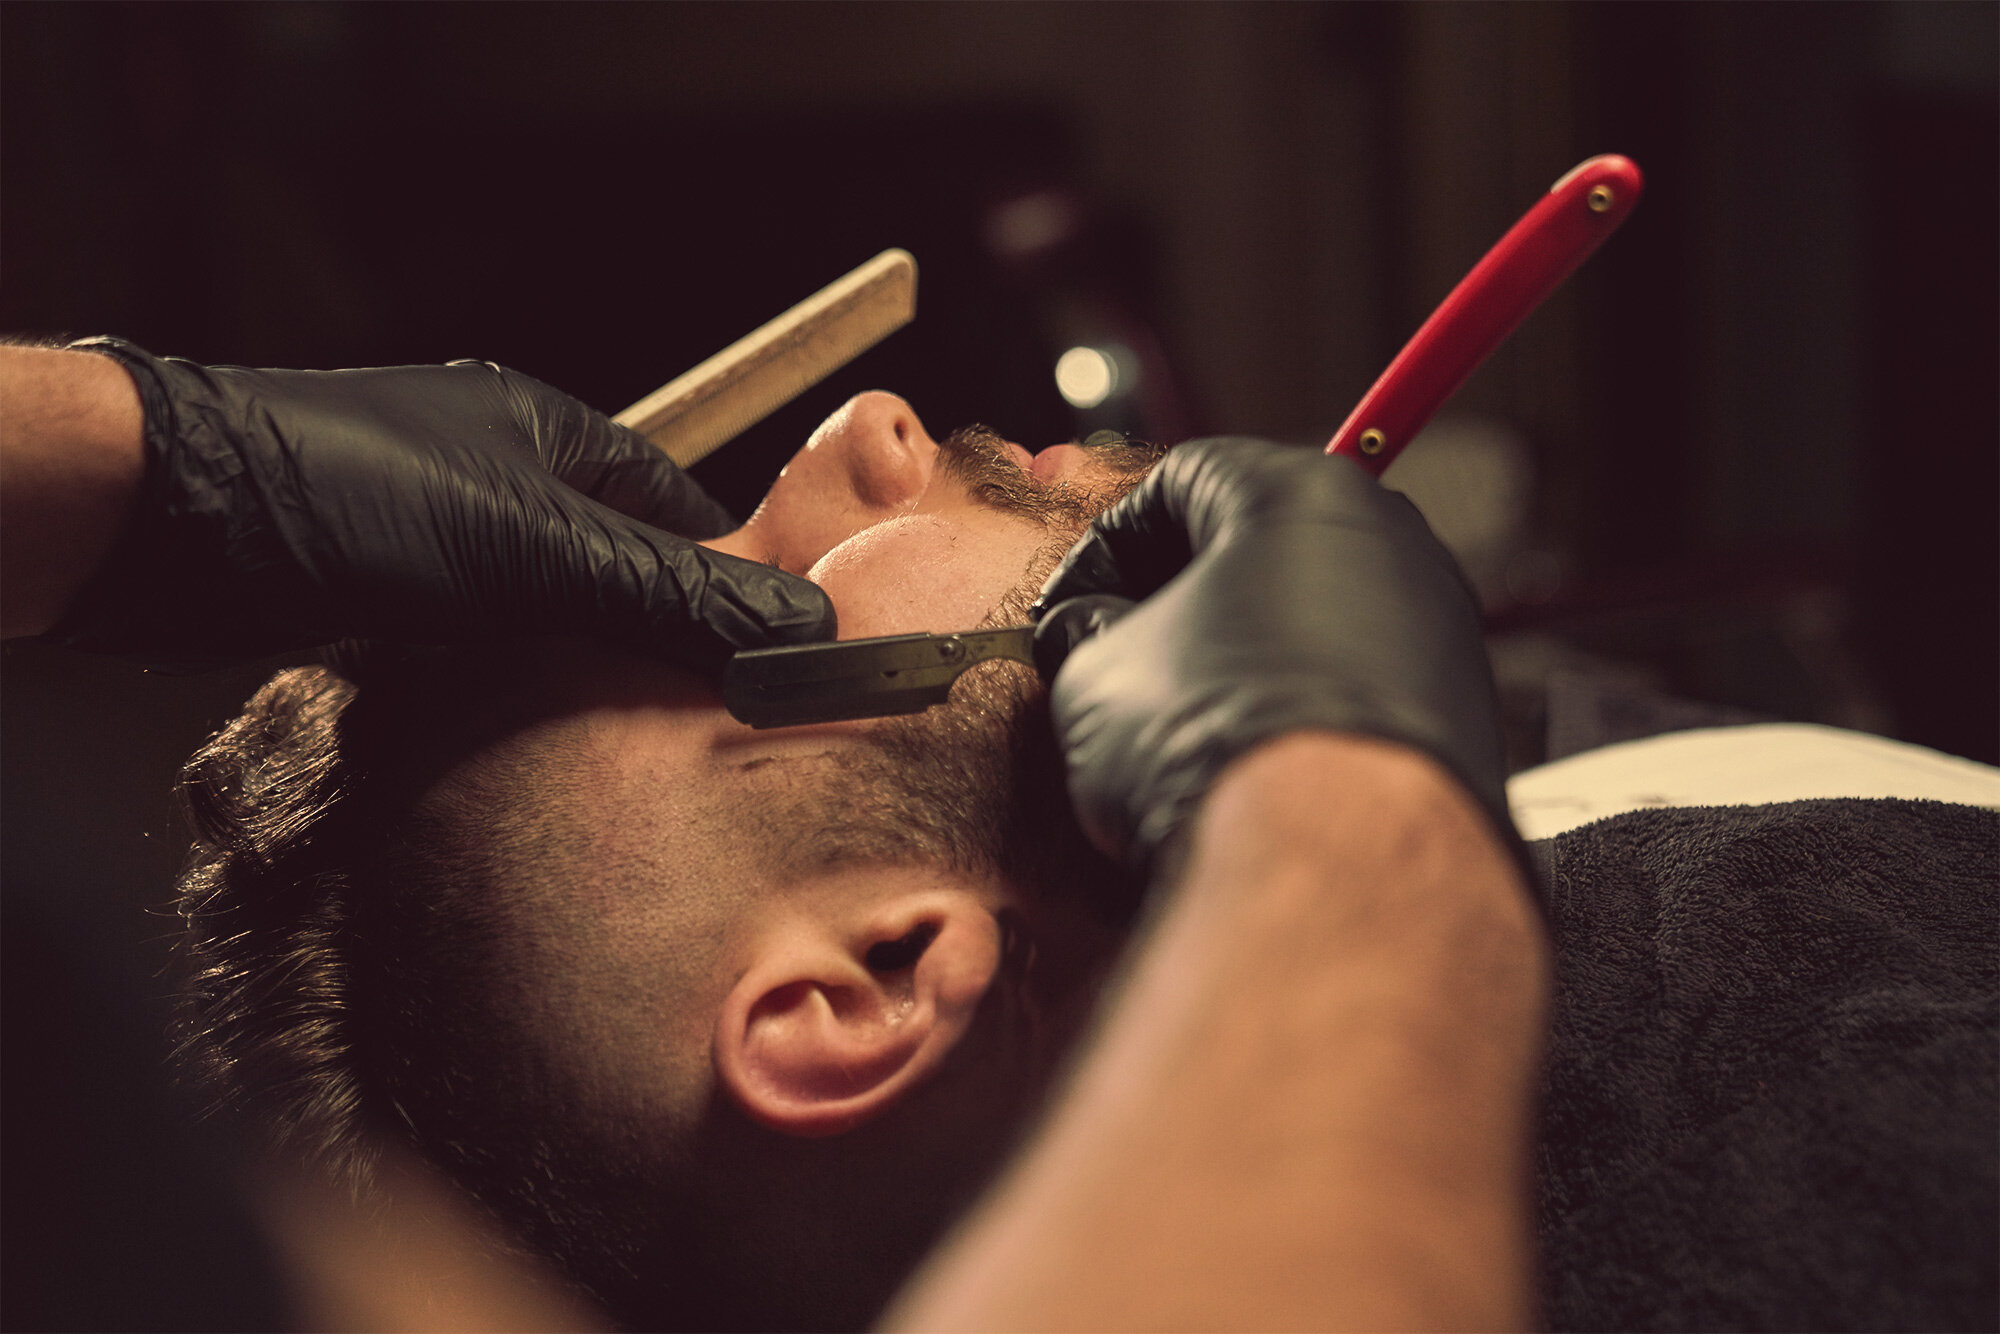 Best Barbers Near Me -> Map + Directory -> Find A Better Barber